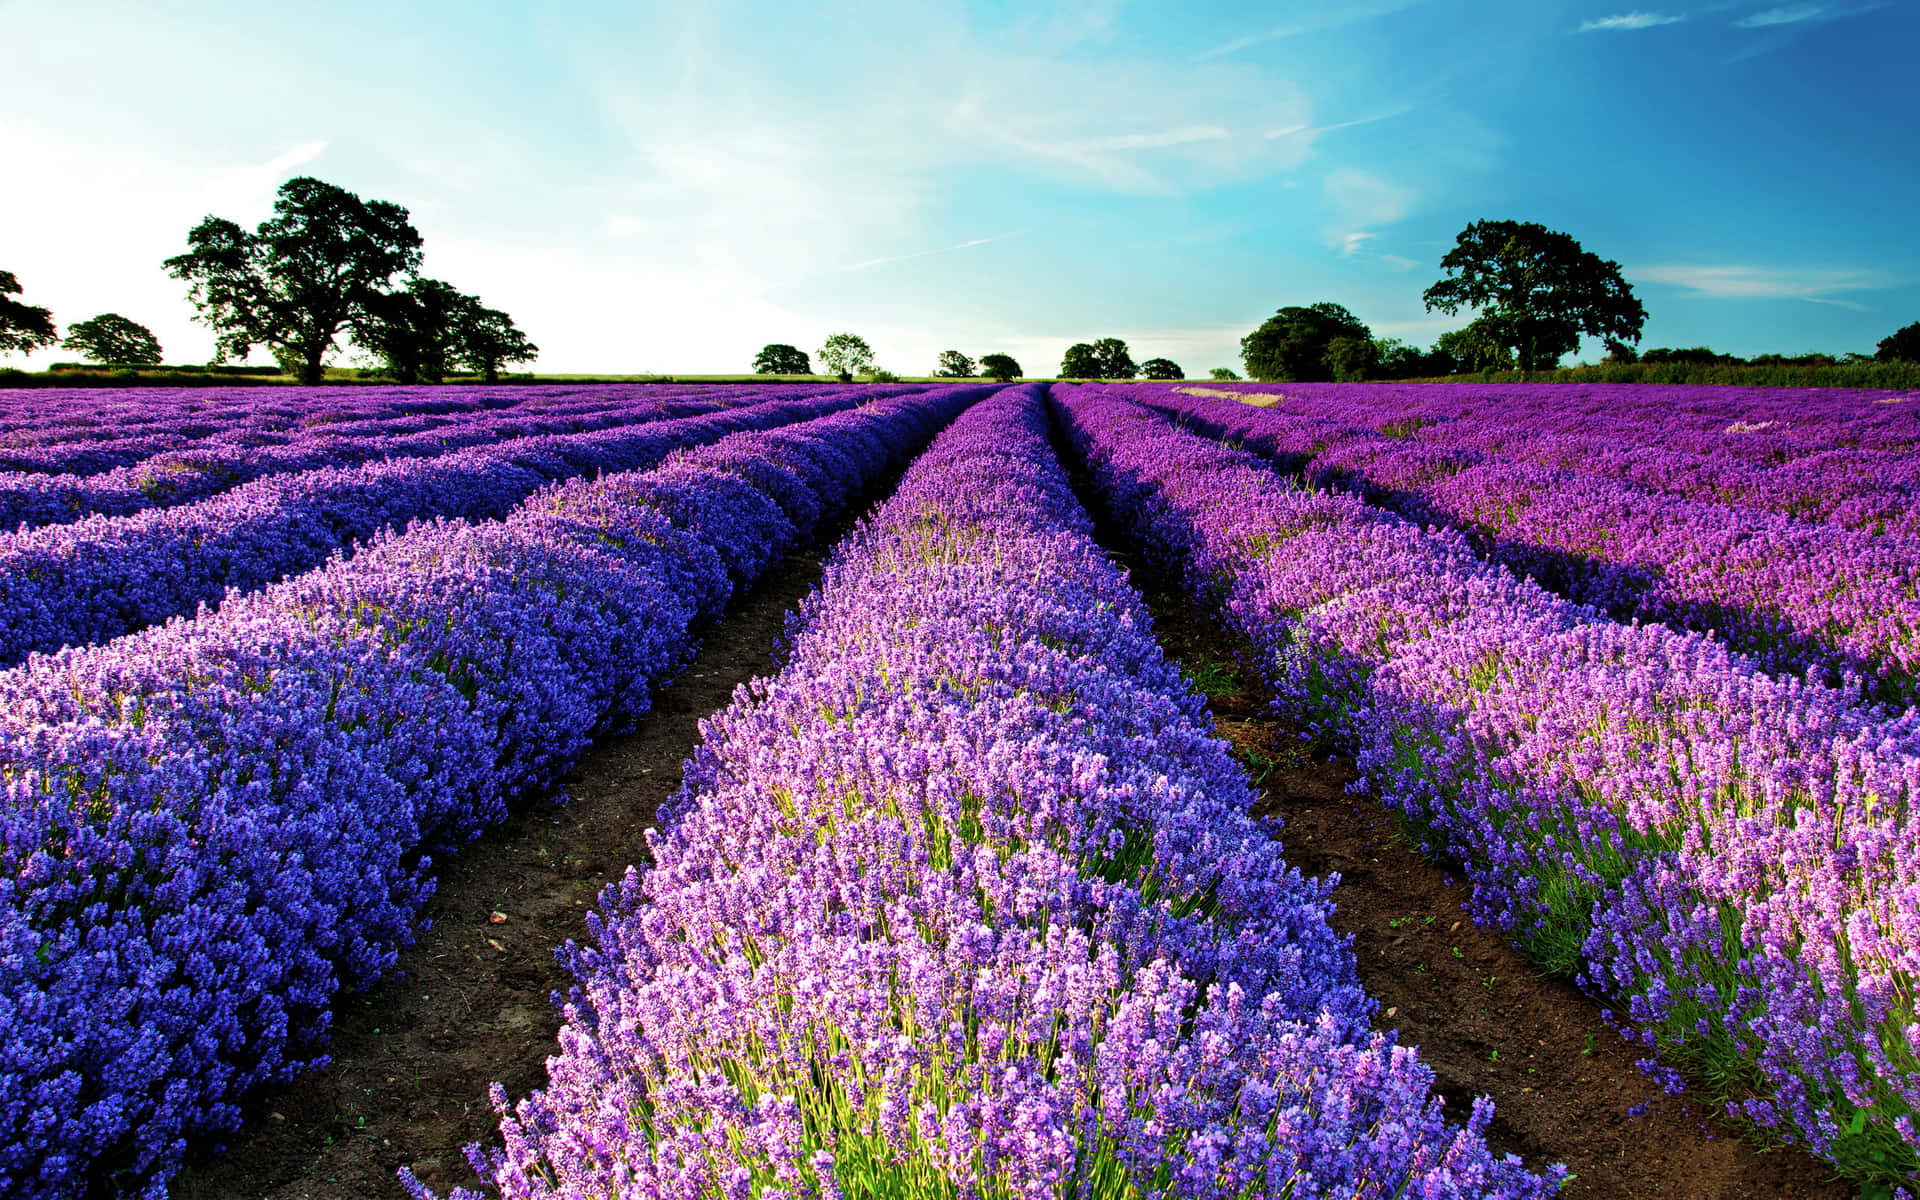 Blissful View of Lavender Fields at Dawn Wallpaper